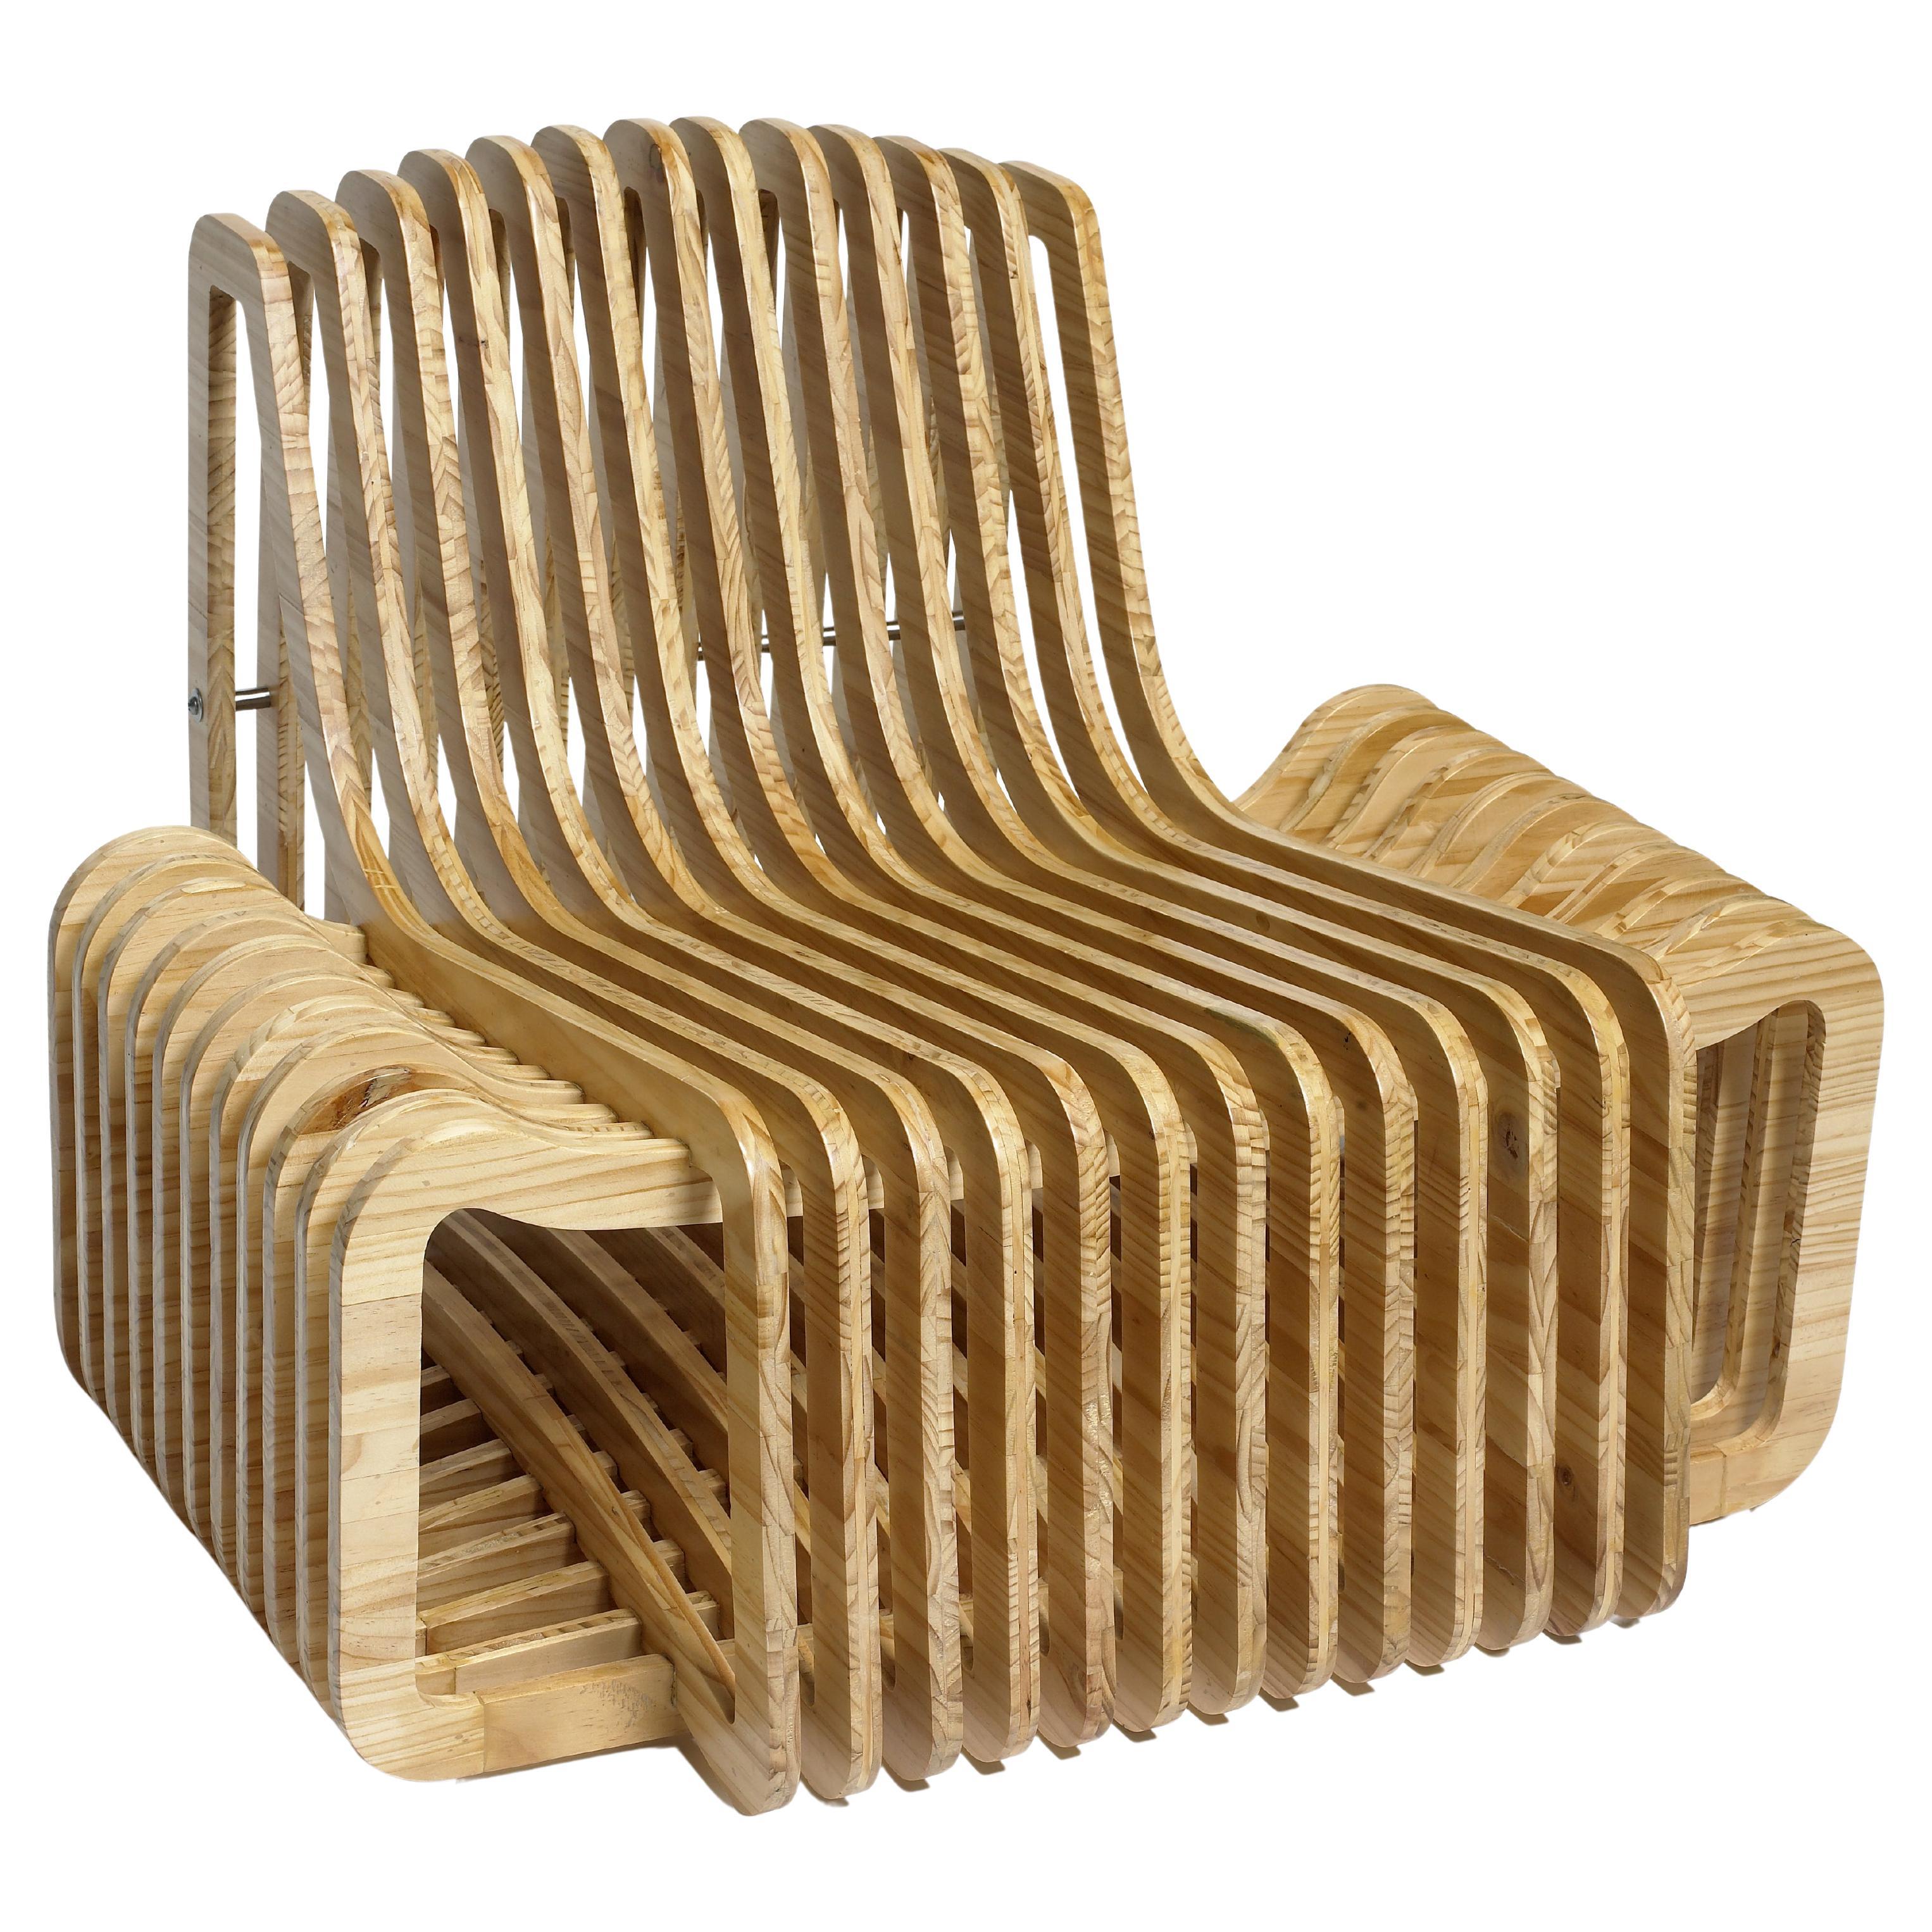 Arata Lounge Chair in a Natural Wood Finish